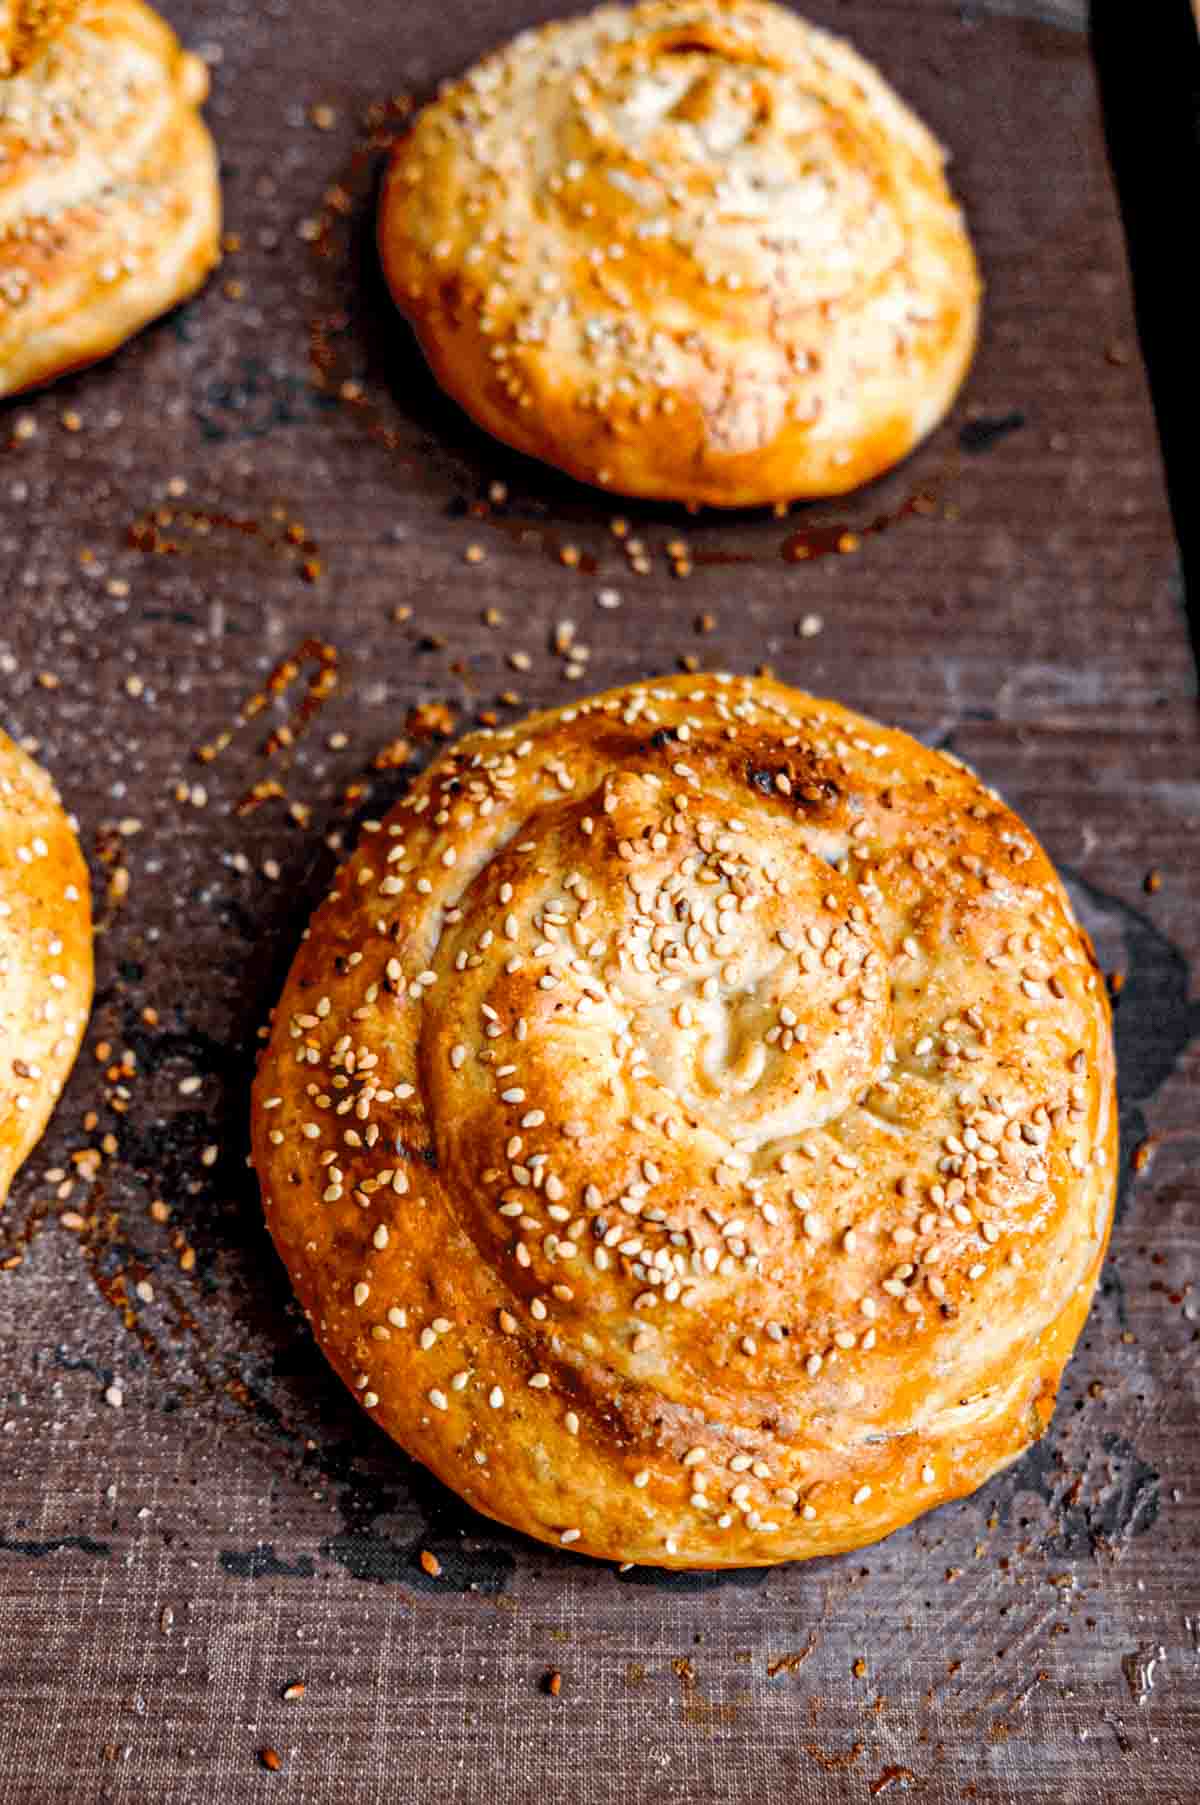 Golden brown phyllo dough spirals with sesame seeds sprinkled on swirly tops.